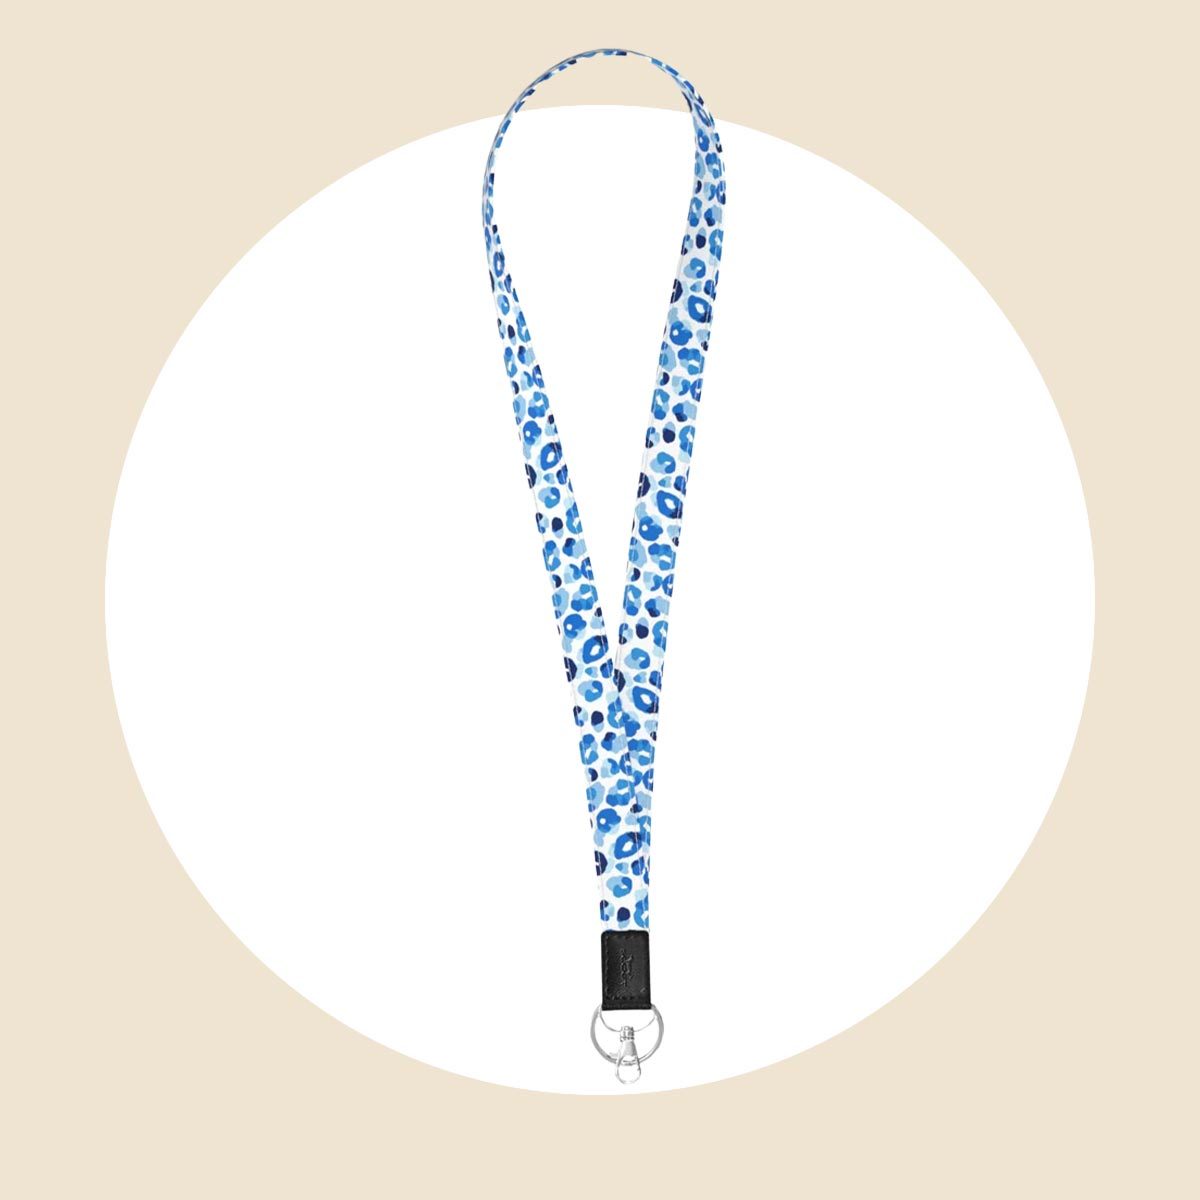 https://www.tasteofhome.com/wp-content/uploads/2022/04/For-the-Forgetful-One-Lanyard_ecomm_via-scoutbags.com_.jpg?fit=700%2C700